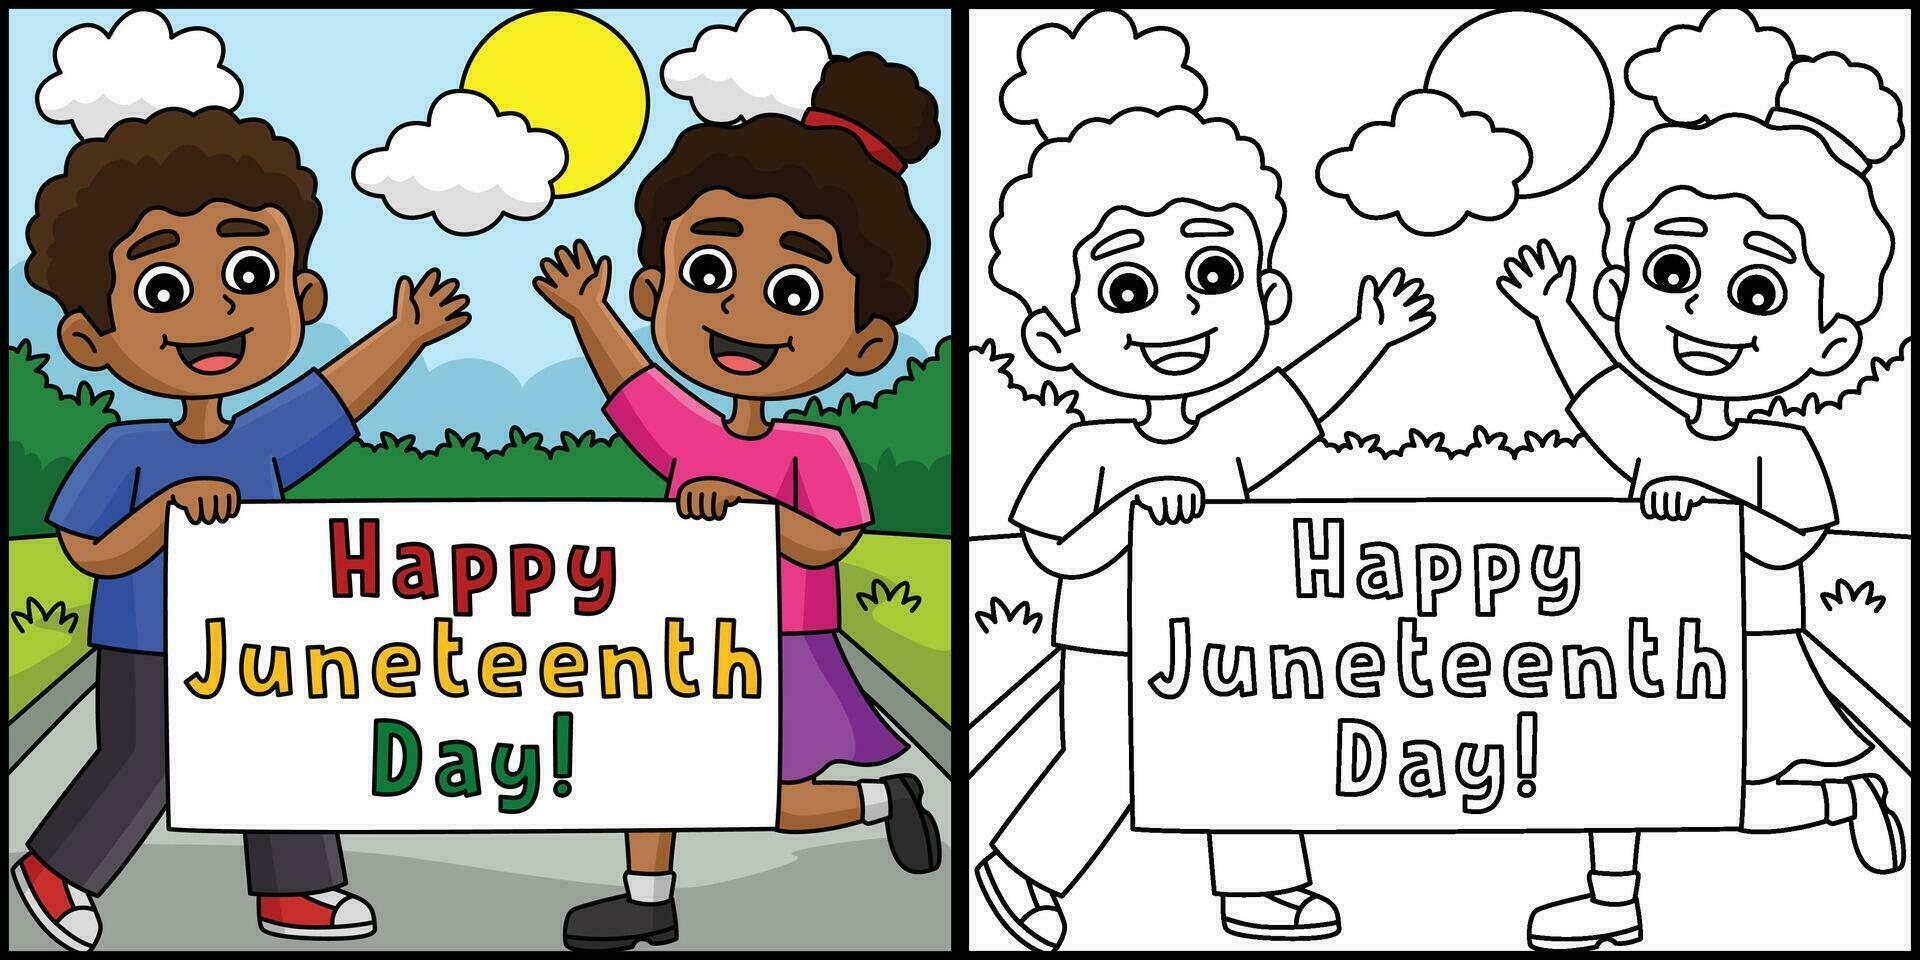 Happy Juneteenth Day Banner Coloring Illustration vector